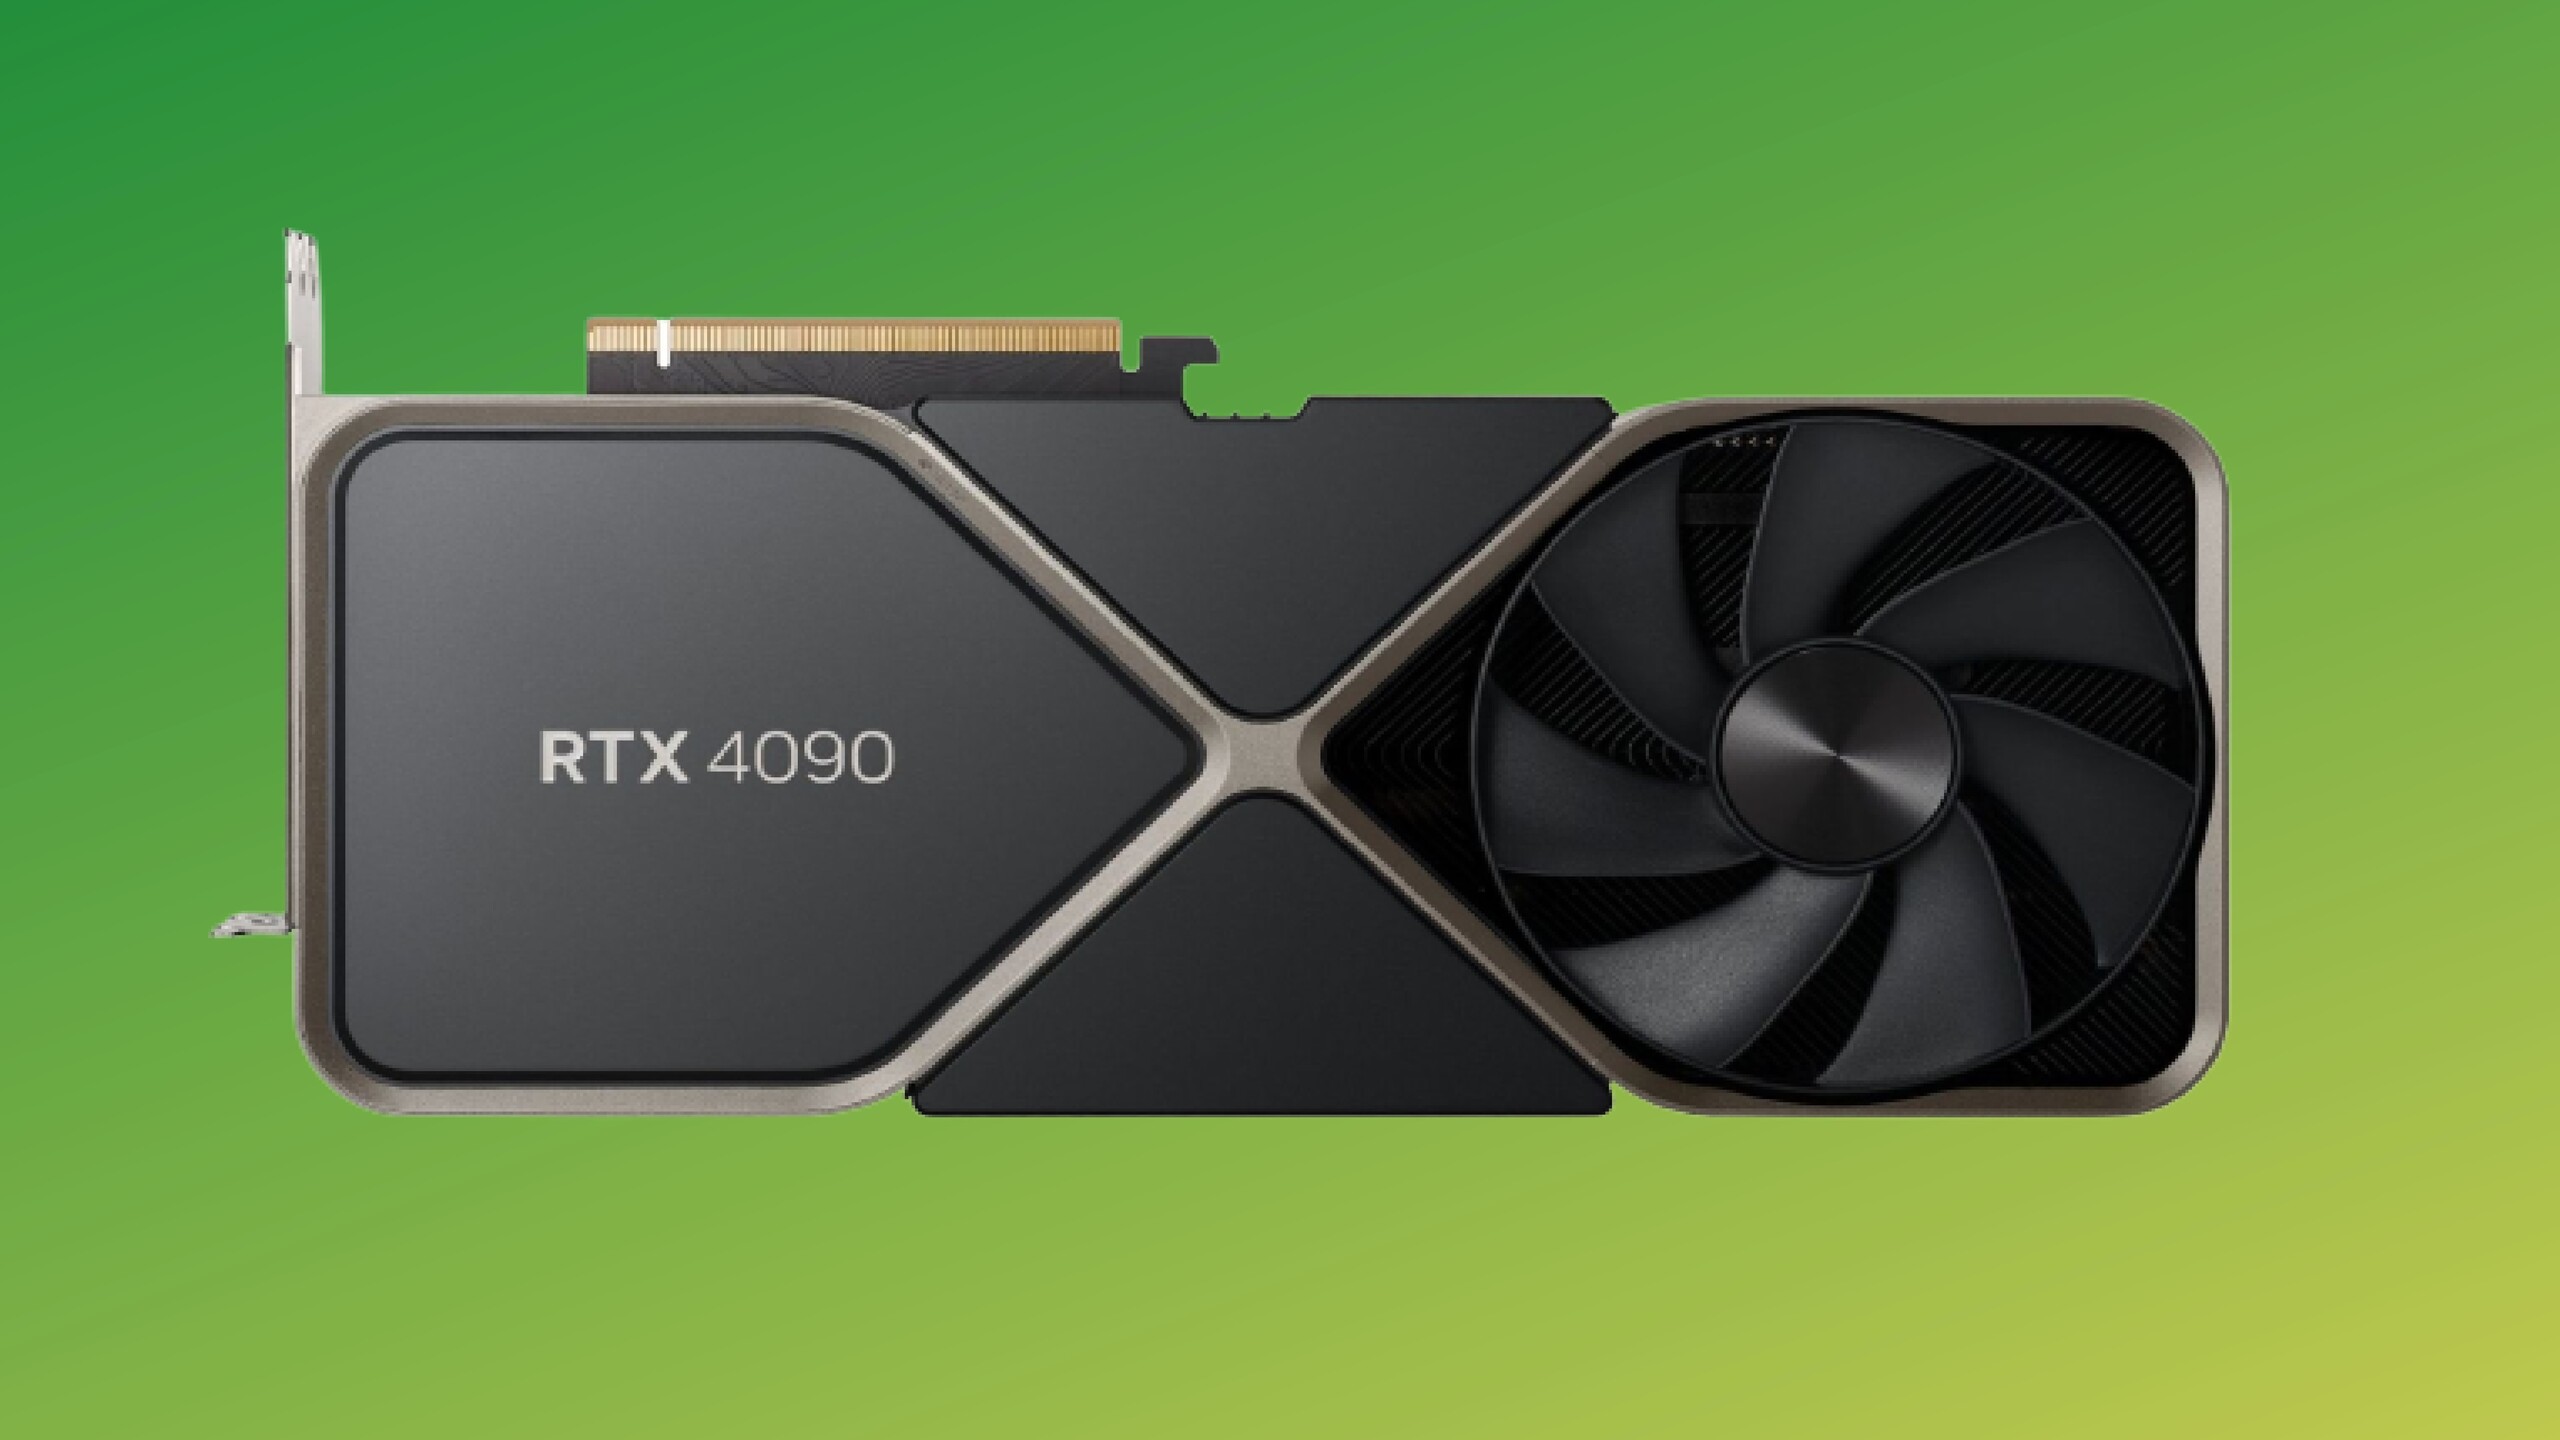 NVIDIA RTX 4080 price drops below MSRP in Europe thanks to cheaper US  Dollar 